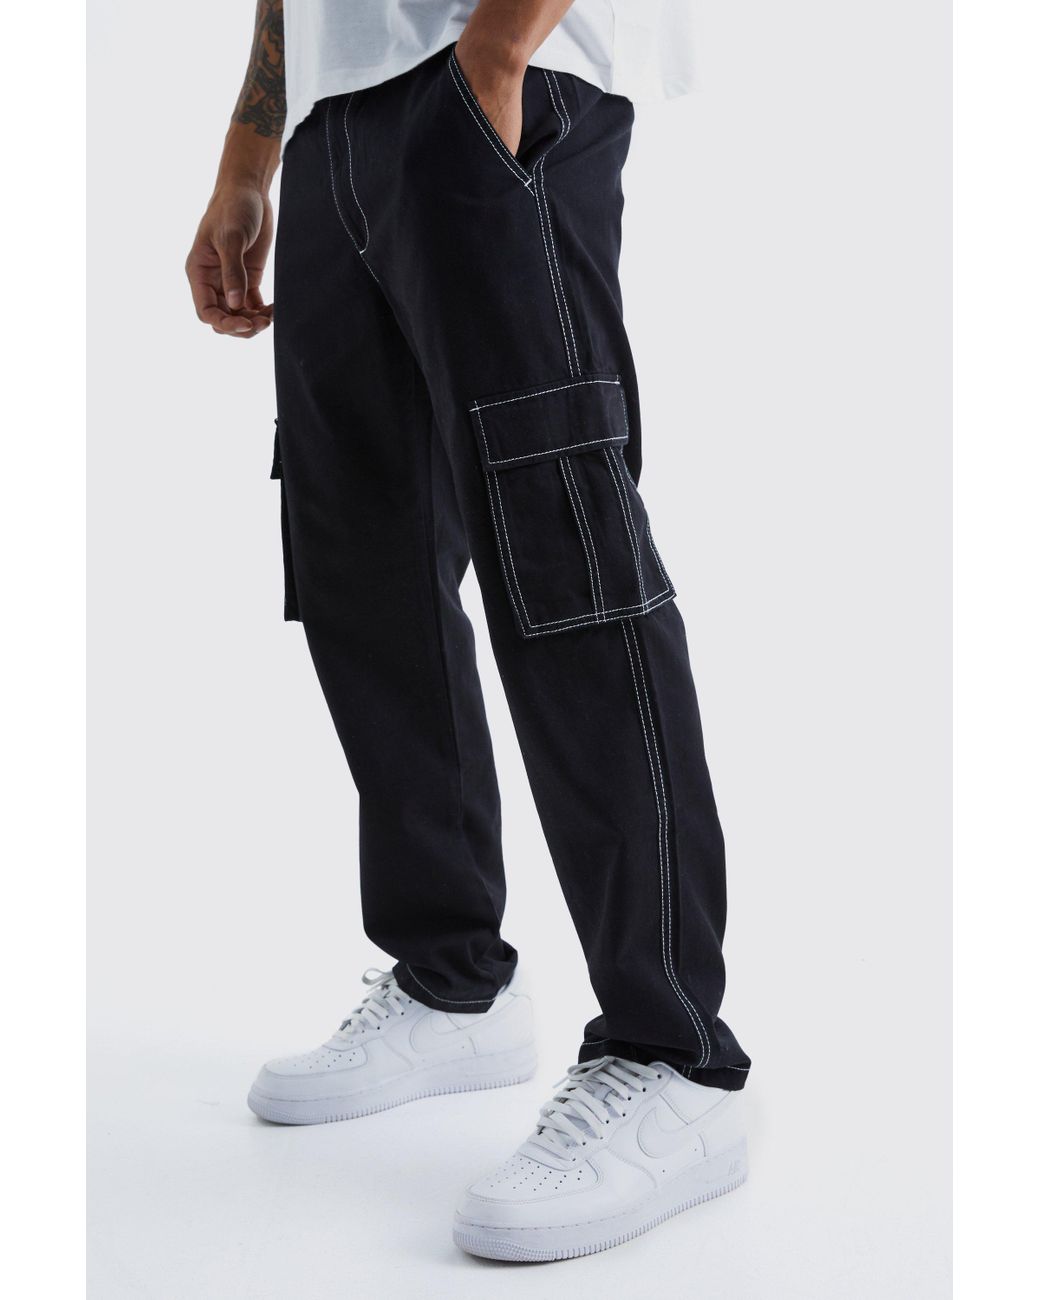 Boohoo Fixed Waist Contrast Stitch Cargo Pants in Black